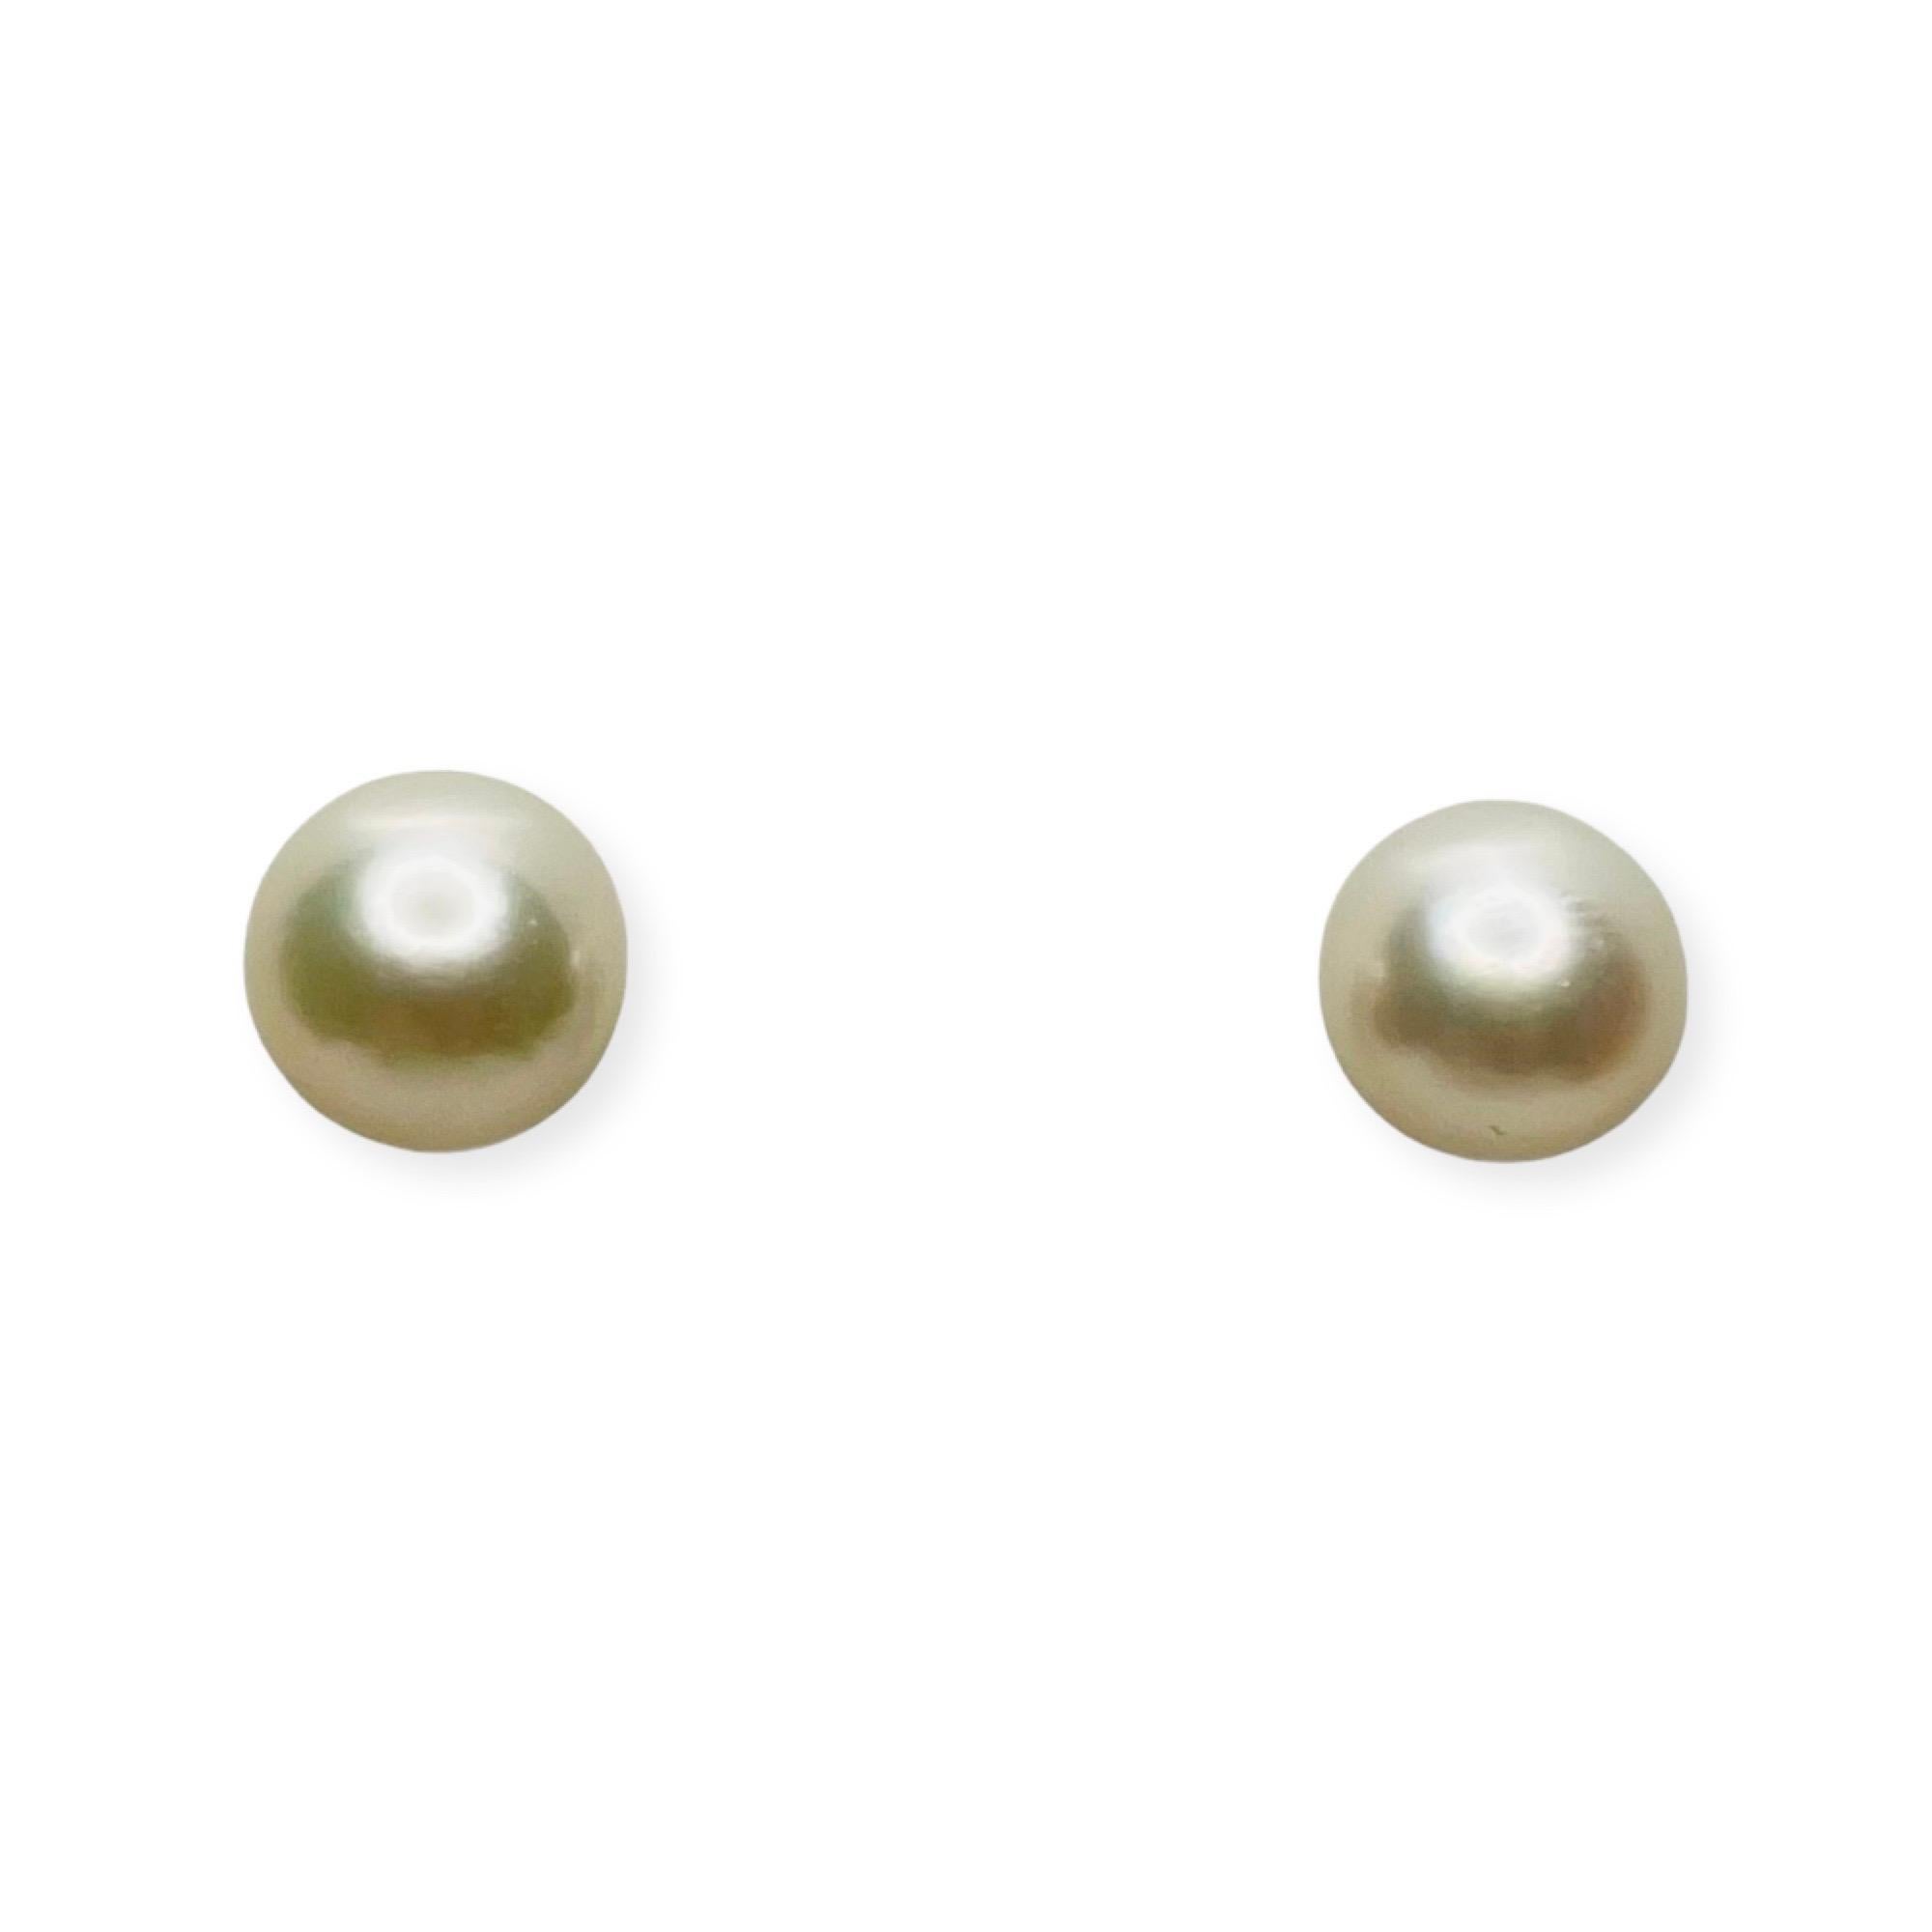 18K Yellow Gold Cultured Japanese Akoya Pearl Earrings. The Pearls are 7.5 mm - 8.0 mm.  The pearls are round with slight blemishes and a high luster.  They are well matched. They have a rose overtone. These are Stud earrings with 18K posts and 14K